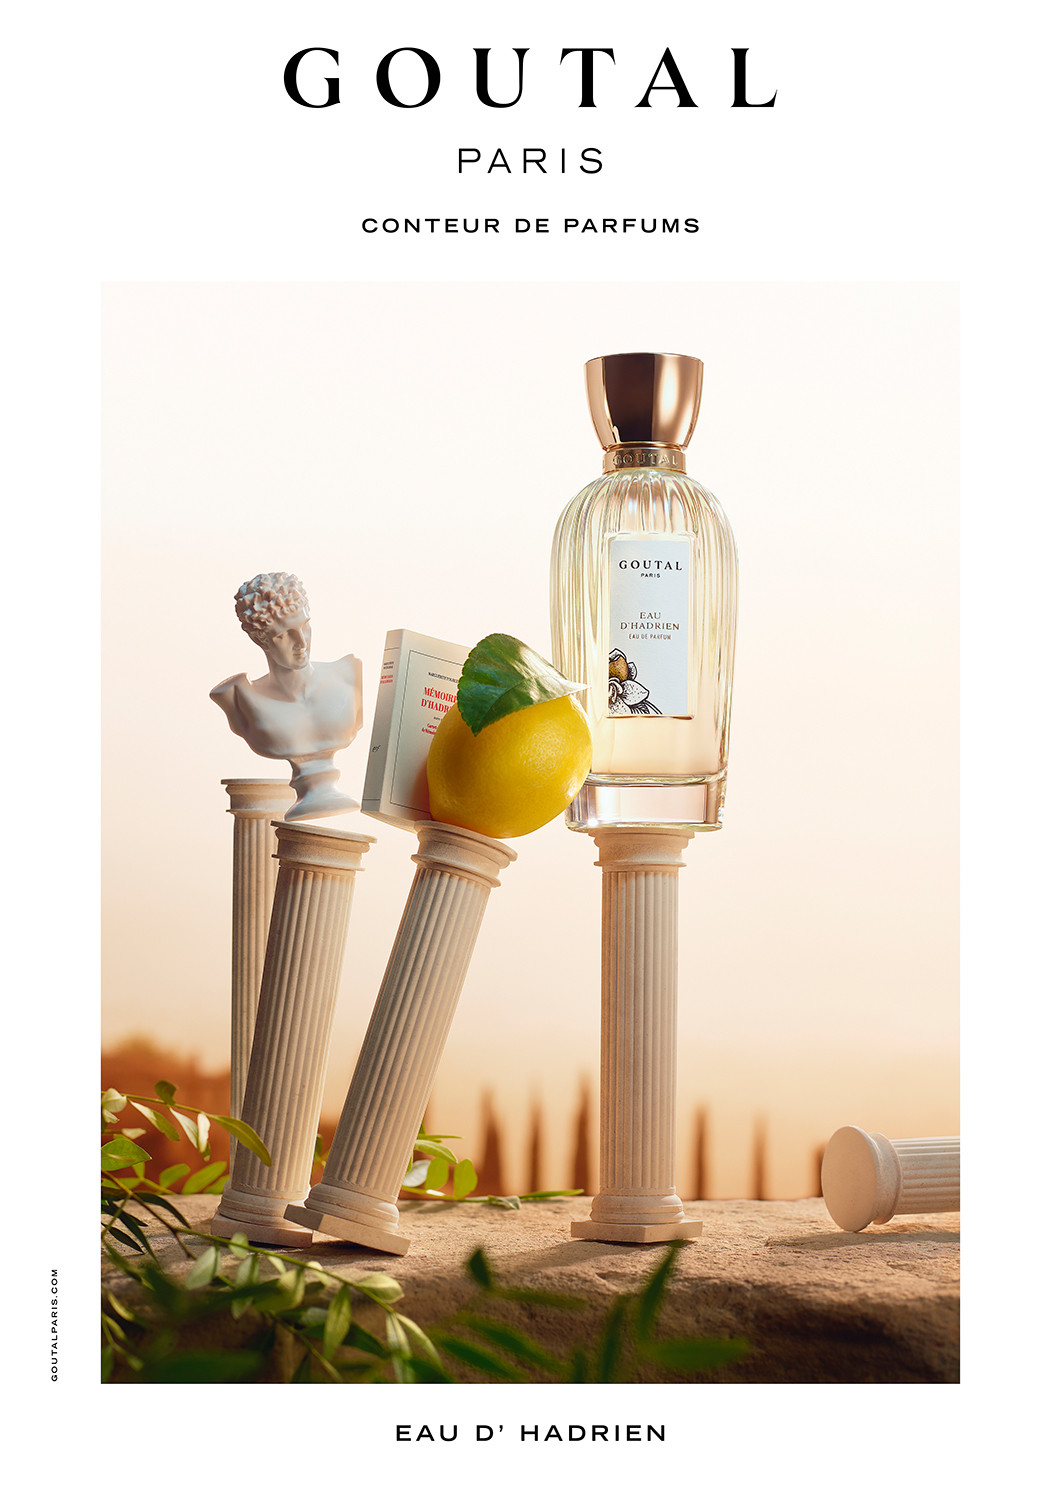 GOUTAL, shot by Charles Negre - © artifices